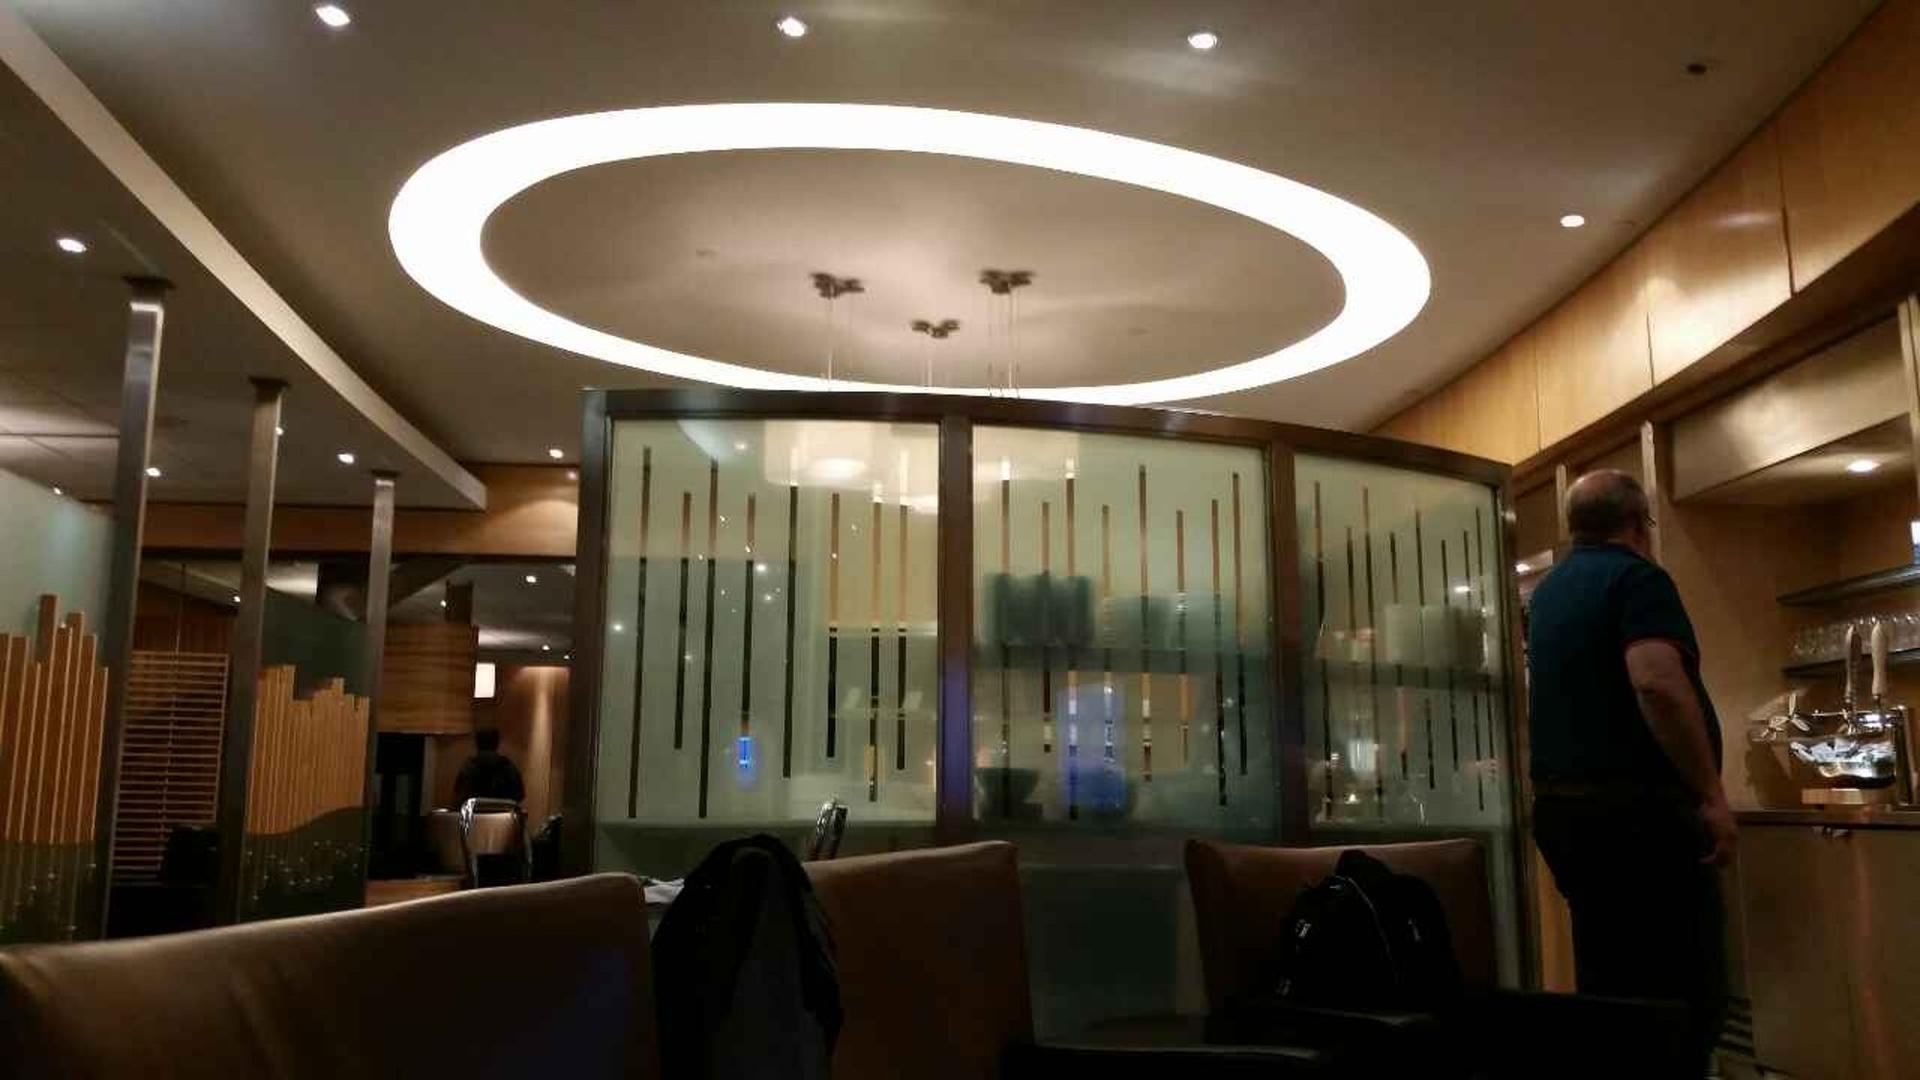 Air Canada Maple Leaf Lounge image 1 of 2